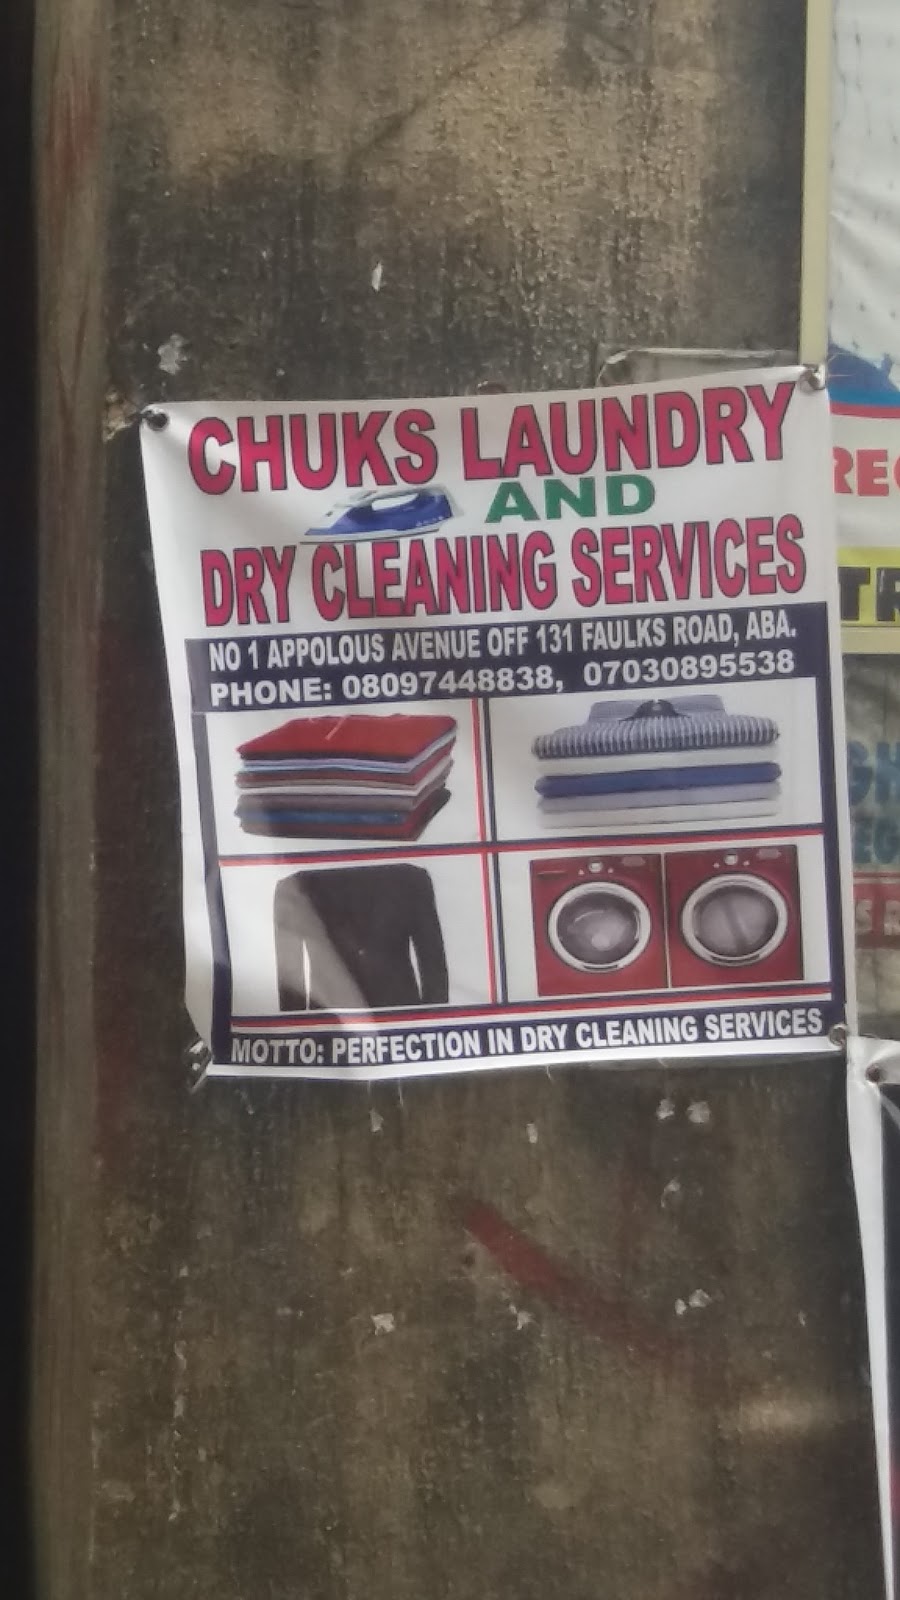 Chuks Laundry And Dry Cleaning Services